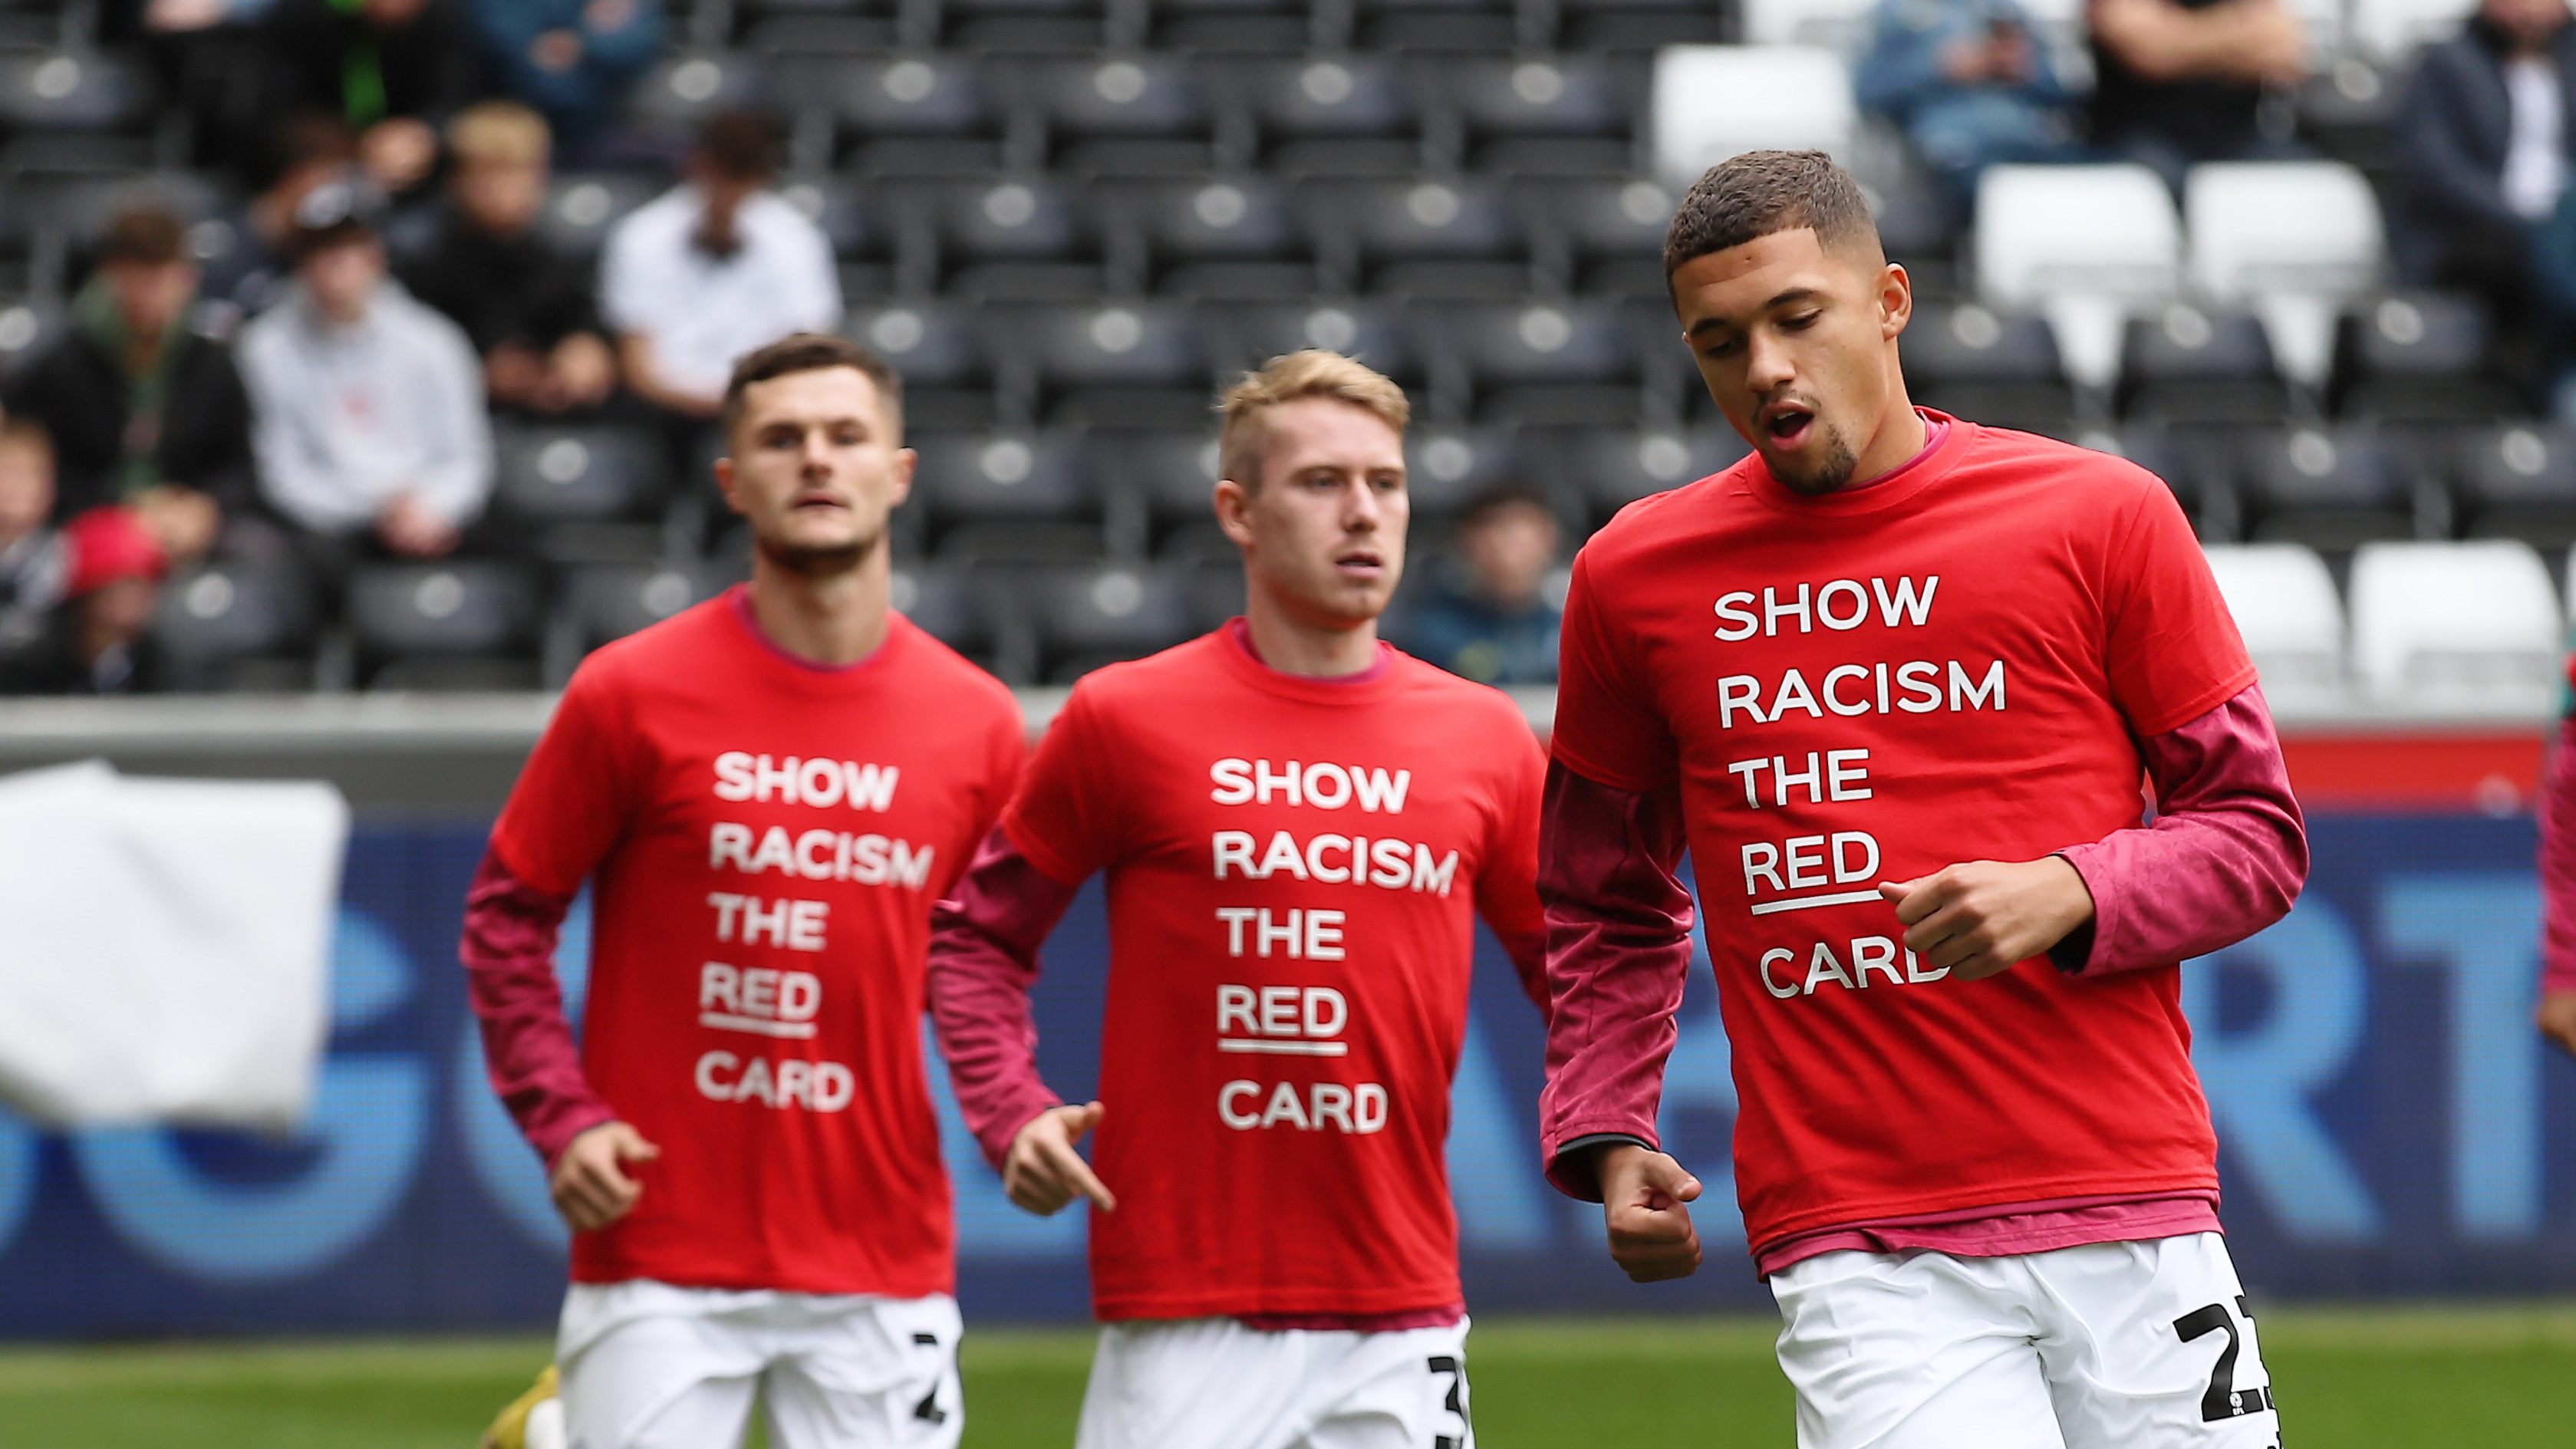 Swansea City players warm up in Show Racism the Red Card t-shirts